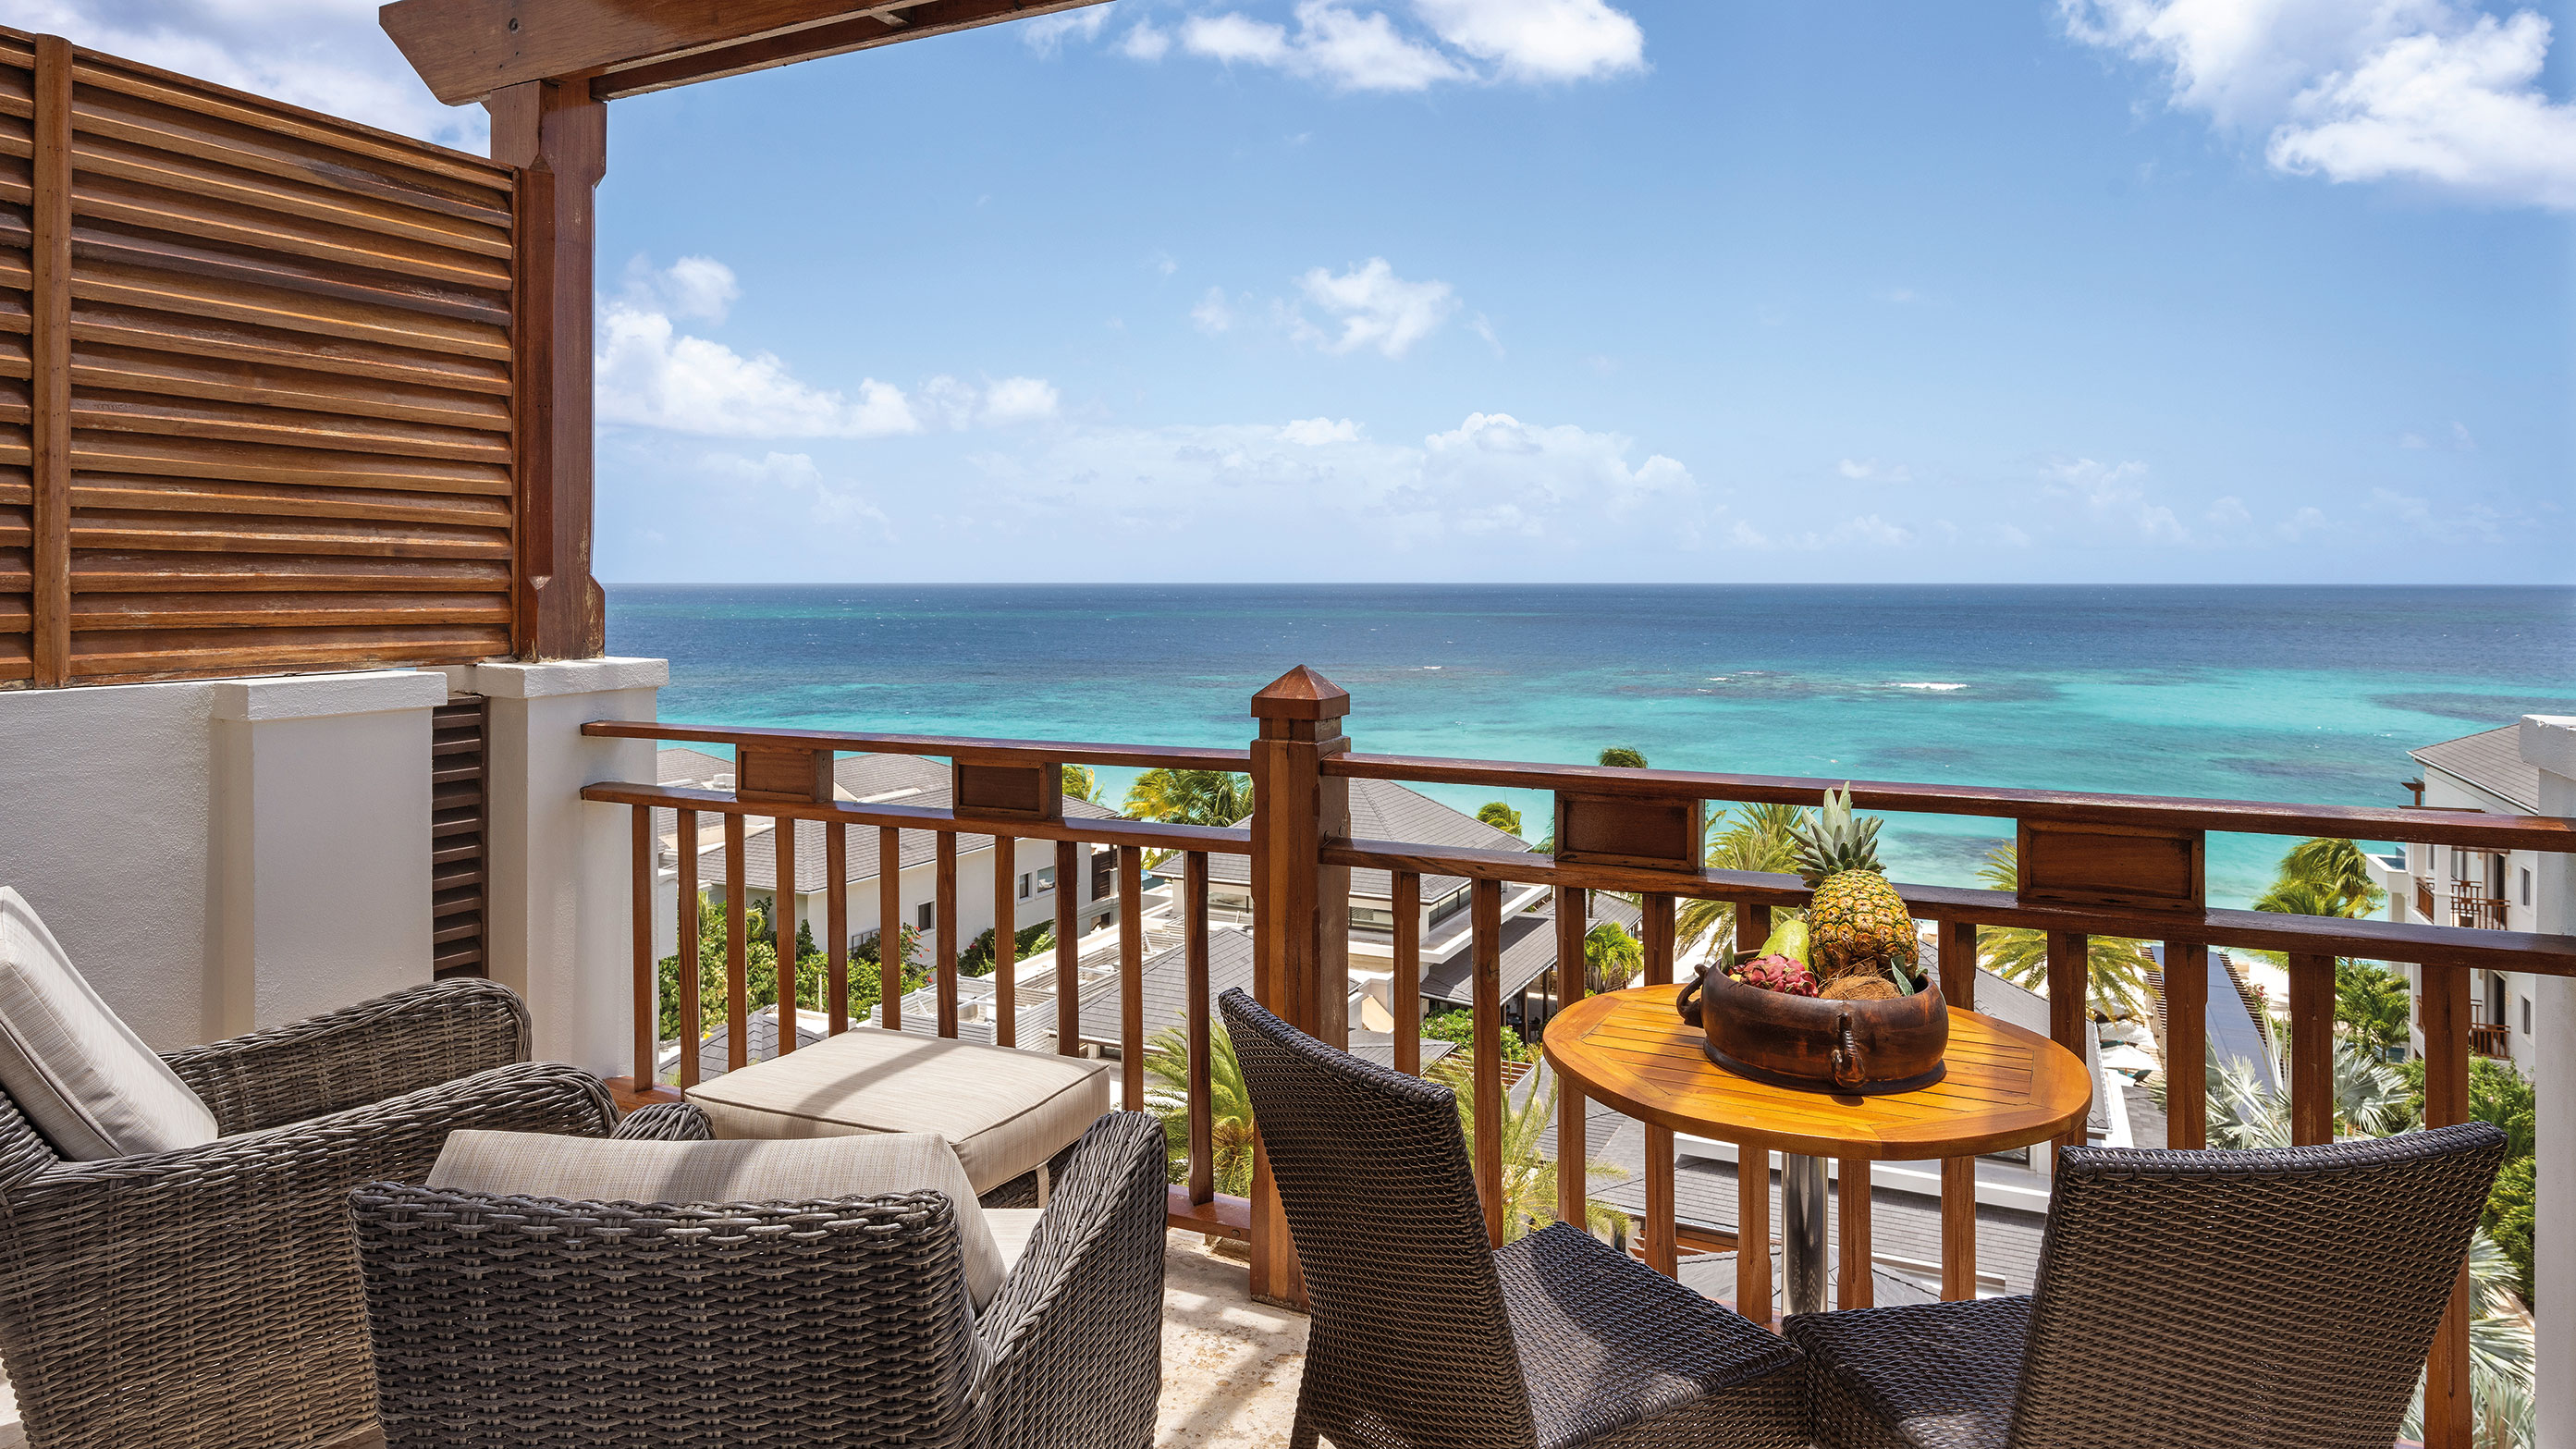 Table and seating area on balcony overlooking ocean